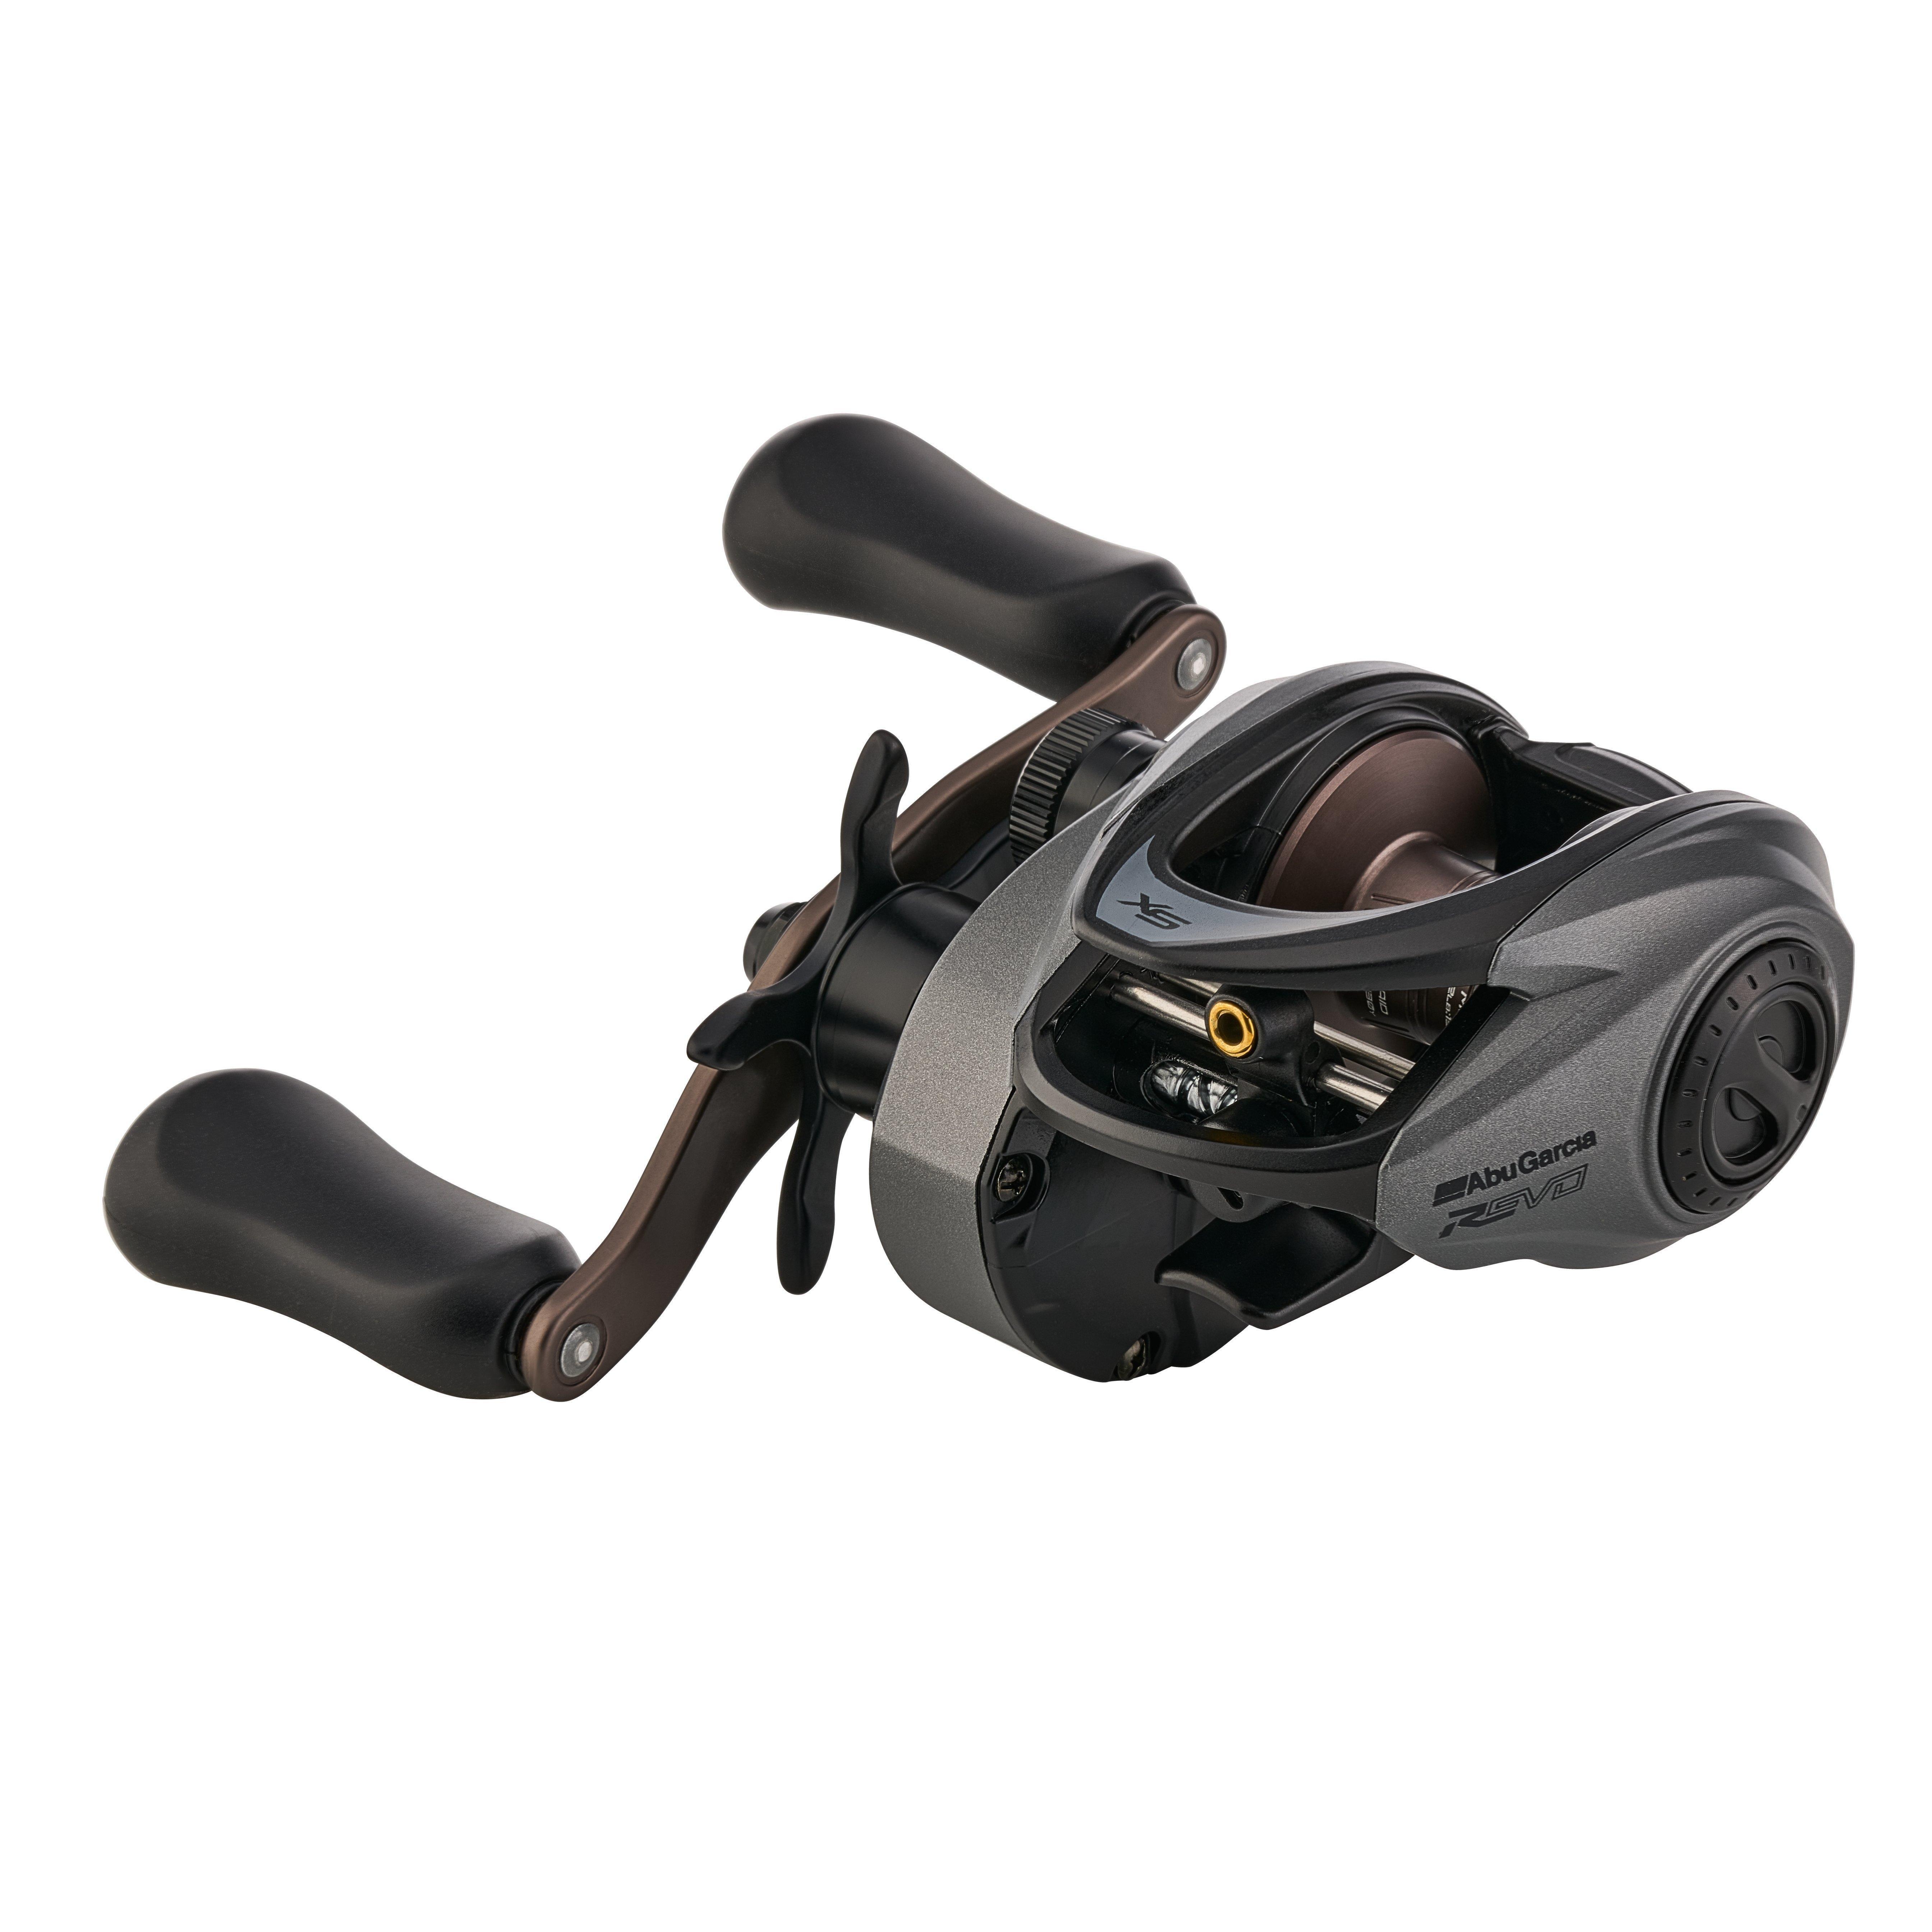 white baitcasting reel, white baitcasting reel Suppliers and